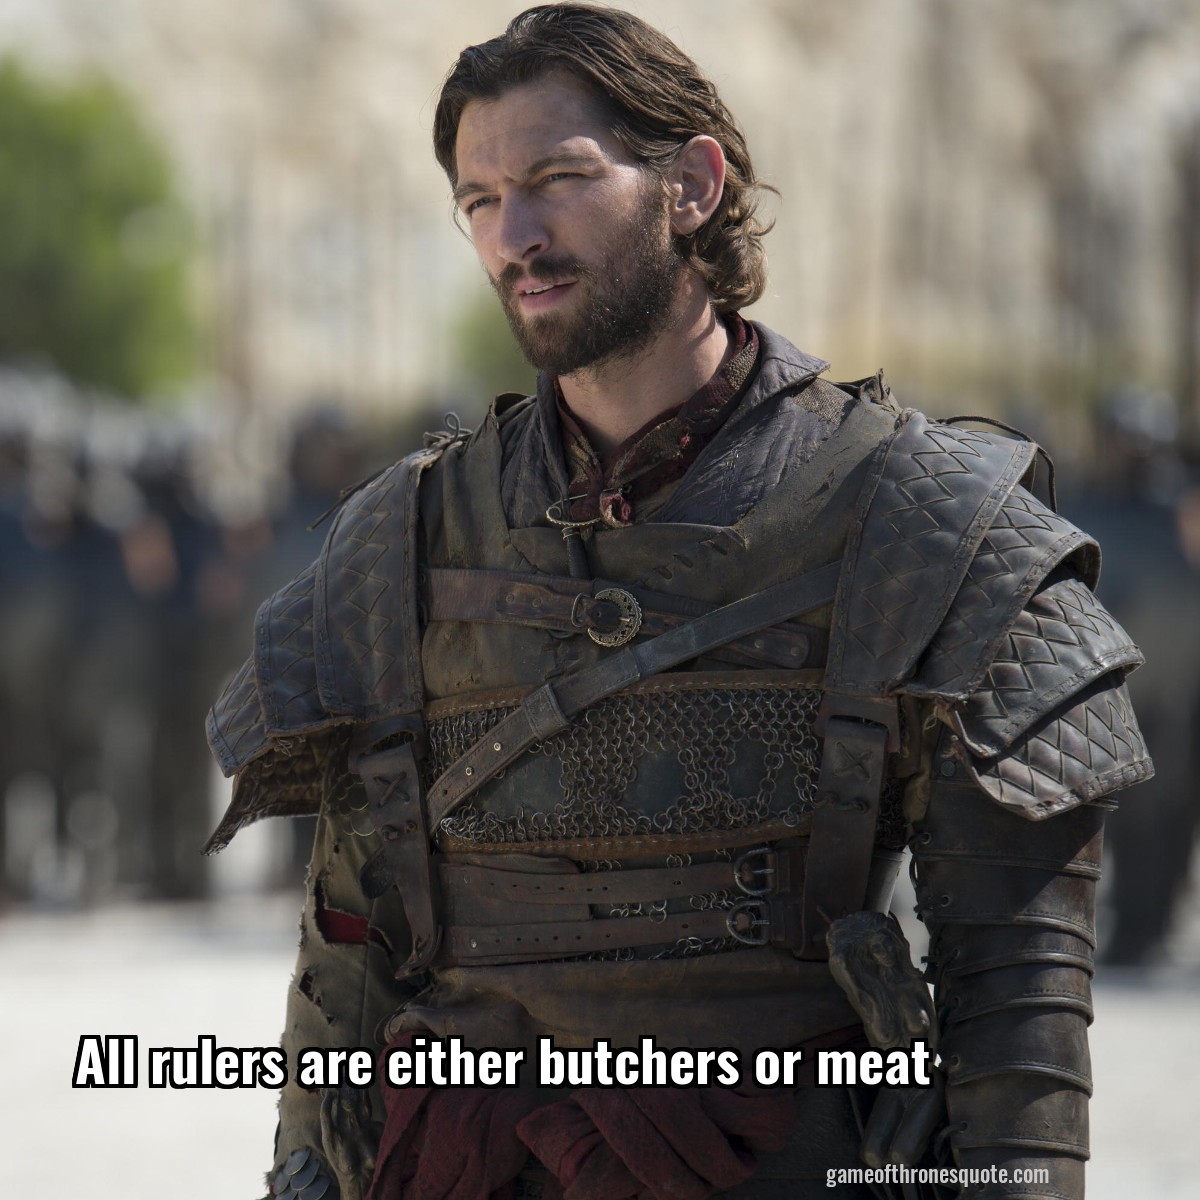 All rulers are either butchers or meat